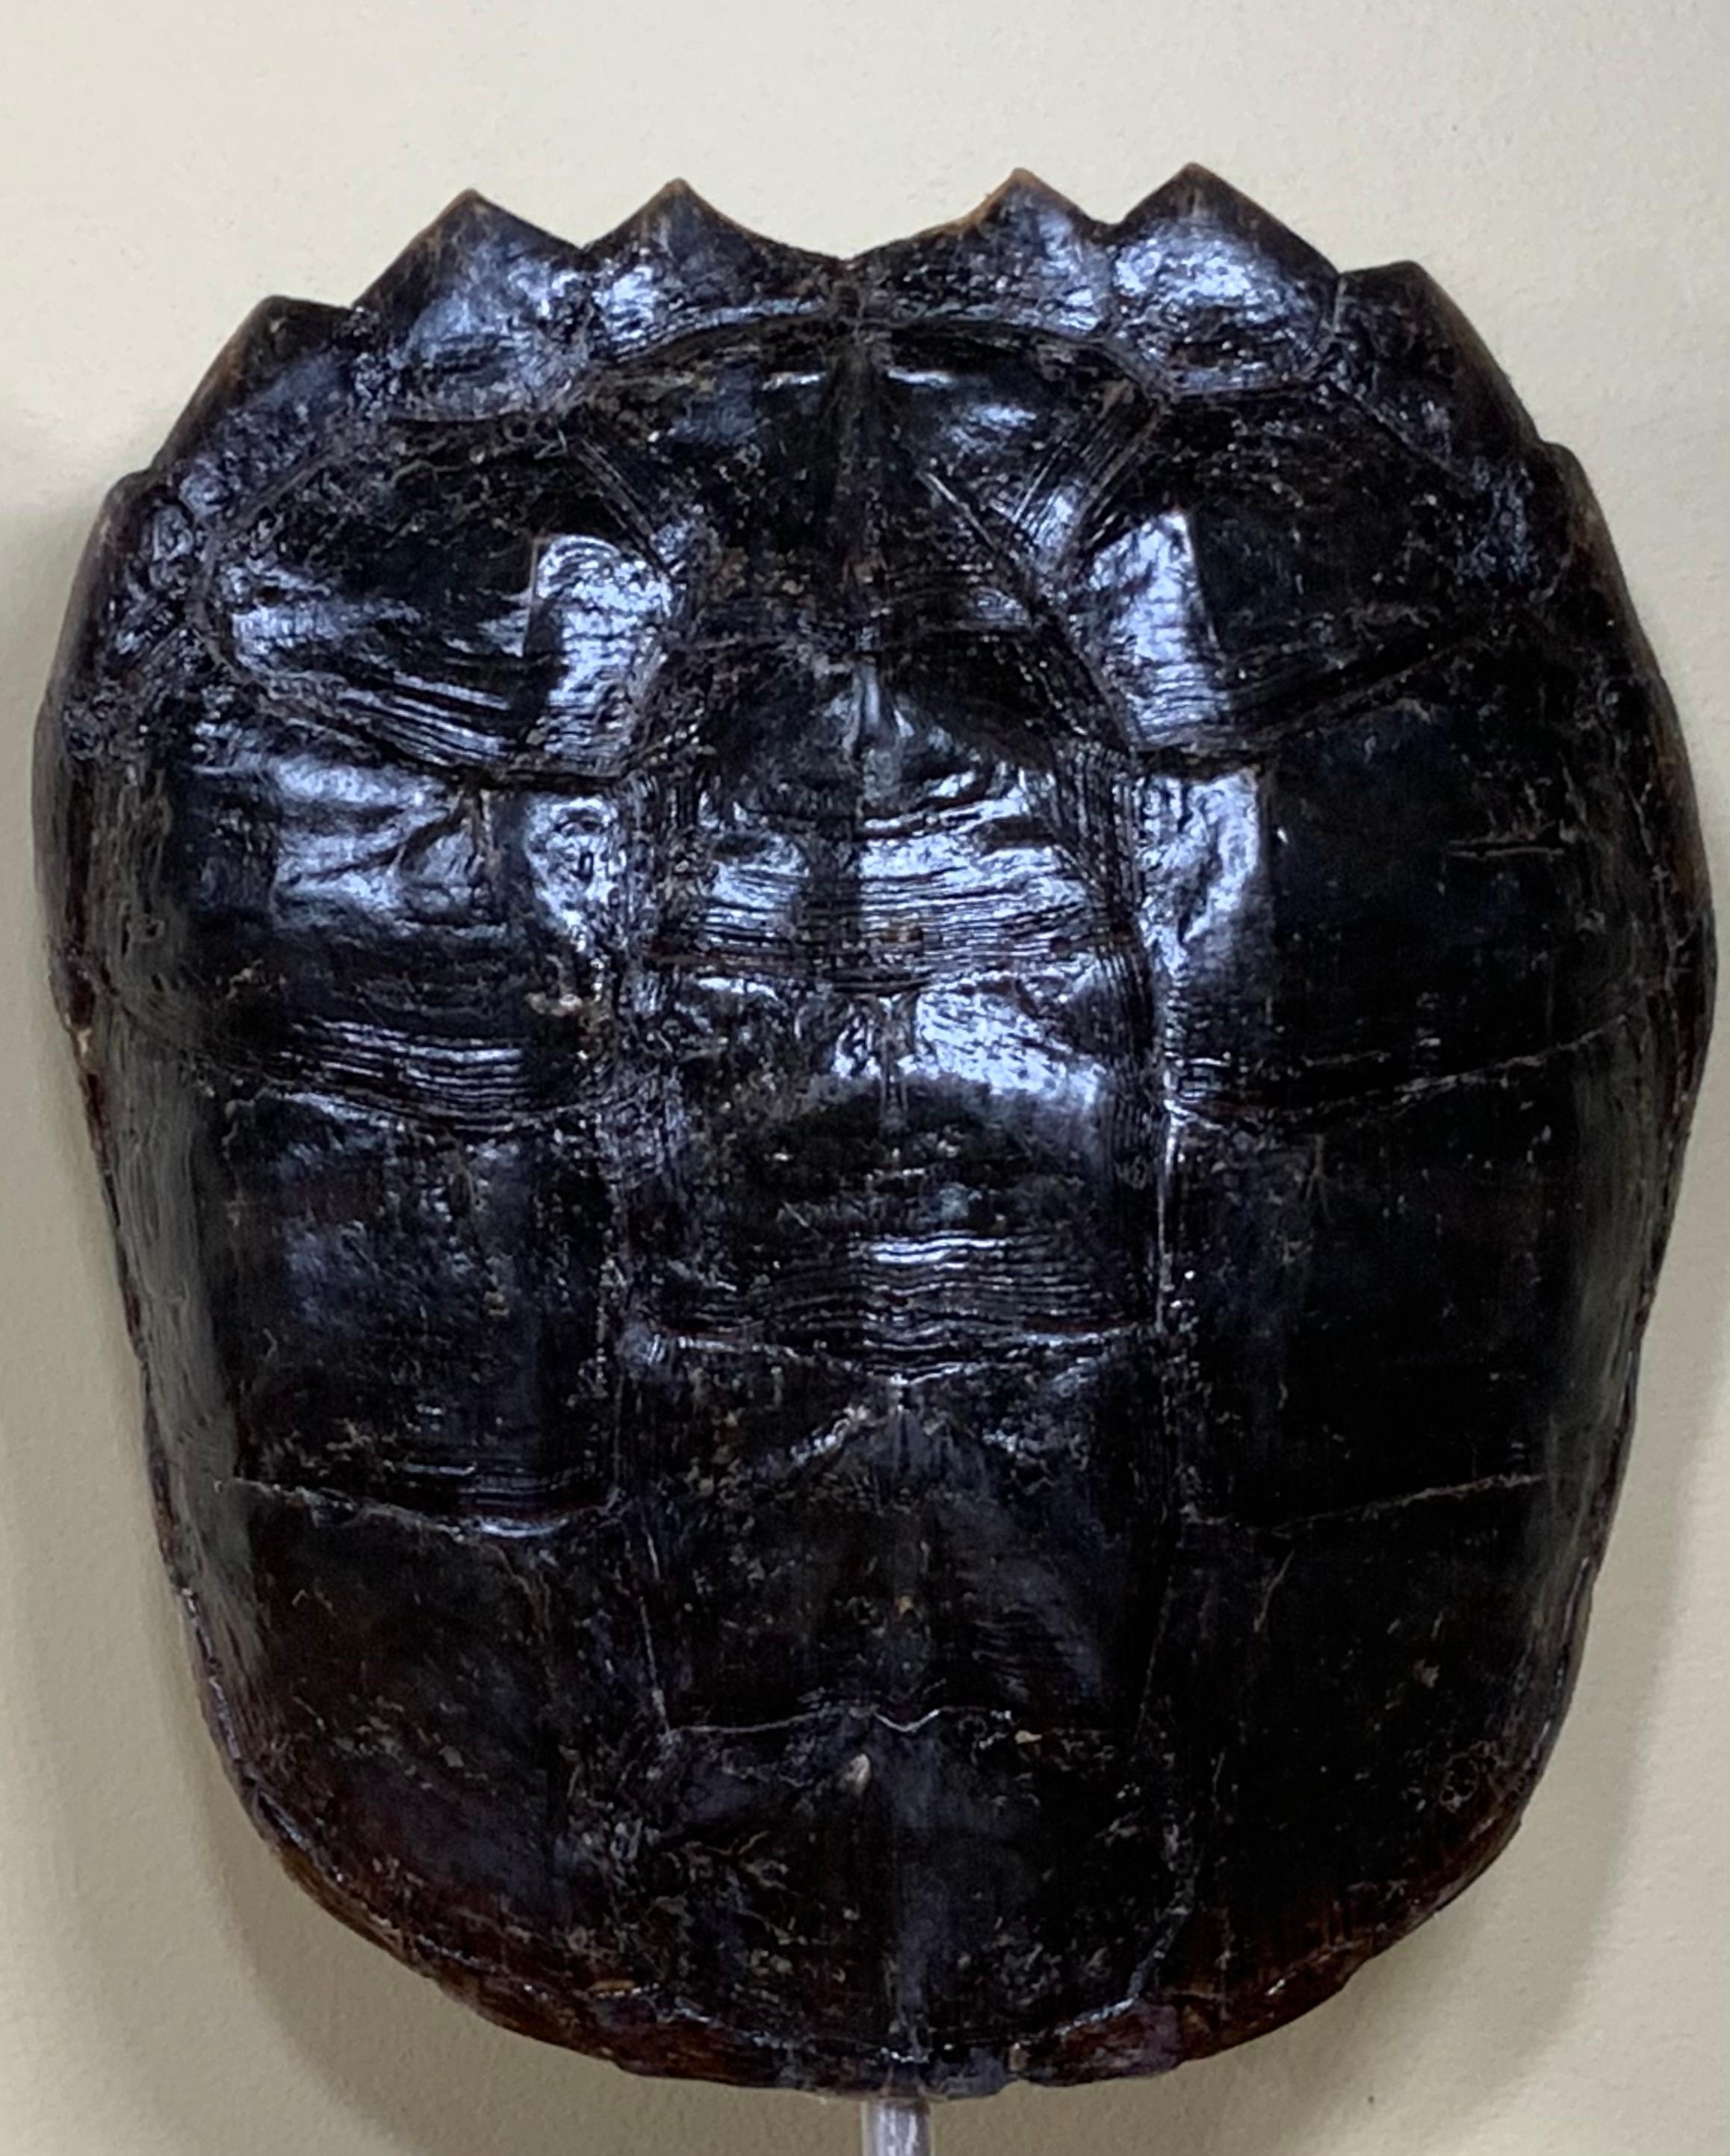 Decorative fresh water turtle shell professionally mounted on onyx base, the shell is cleaned and seal with clear protective satin finish.
And the back is upholstered with fine quality fabric. Beautiful natural piece of art for display.